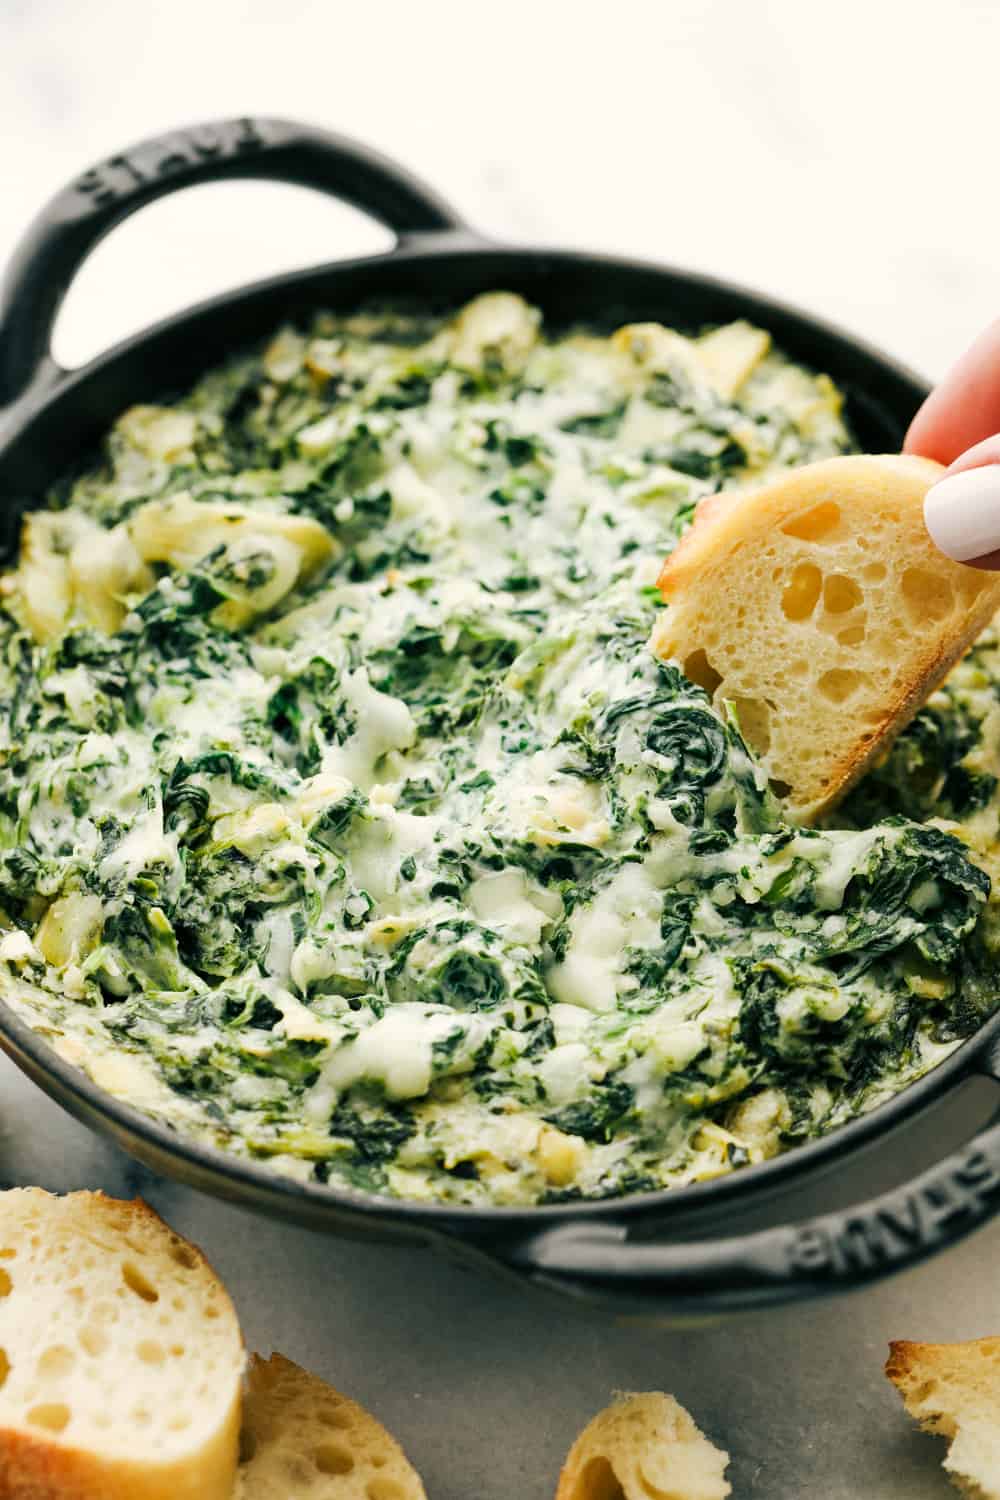 Spinach artichoke dip with bread dipped inside it.